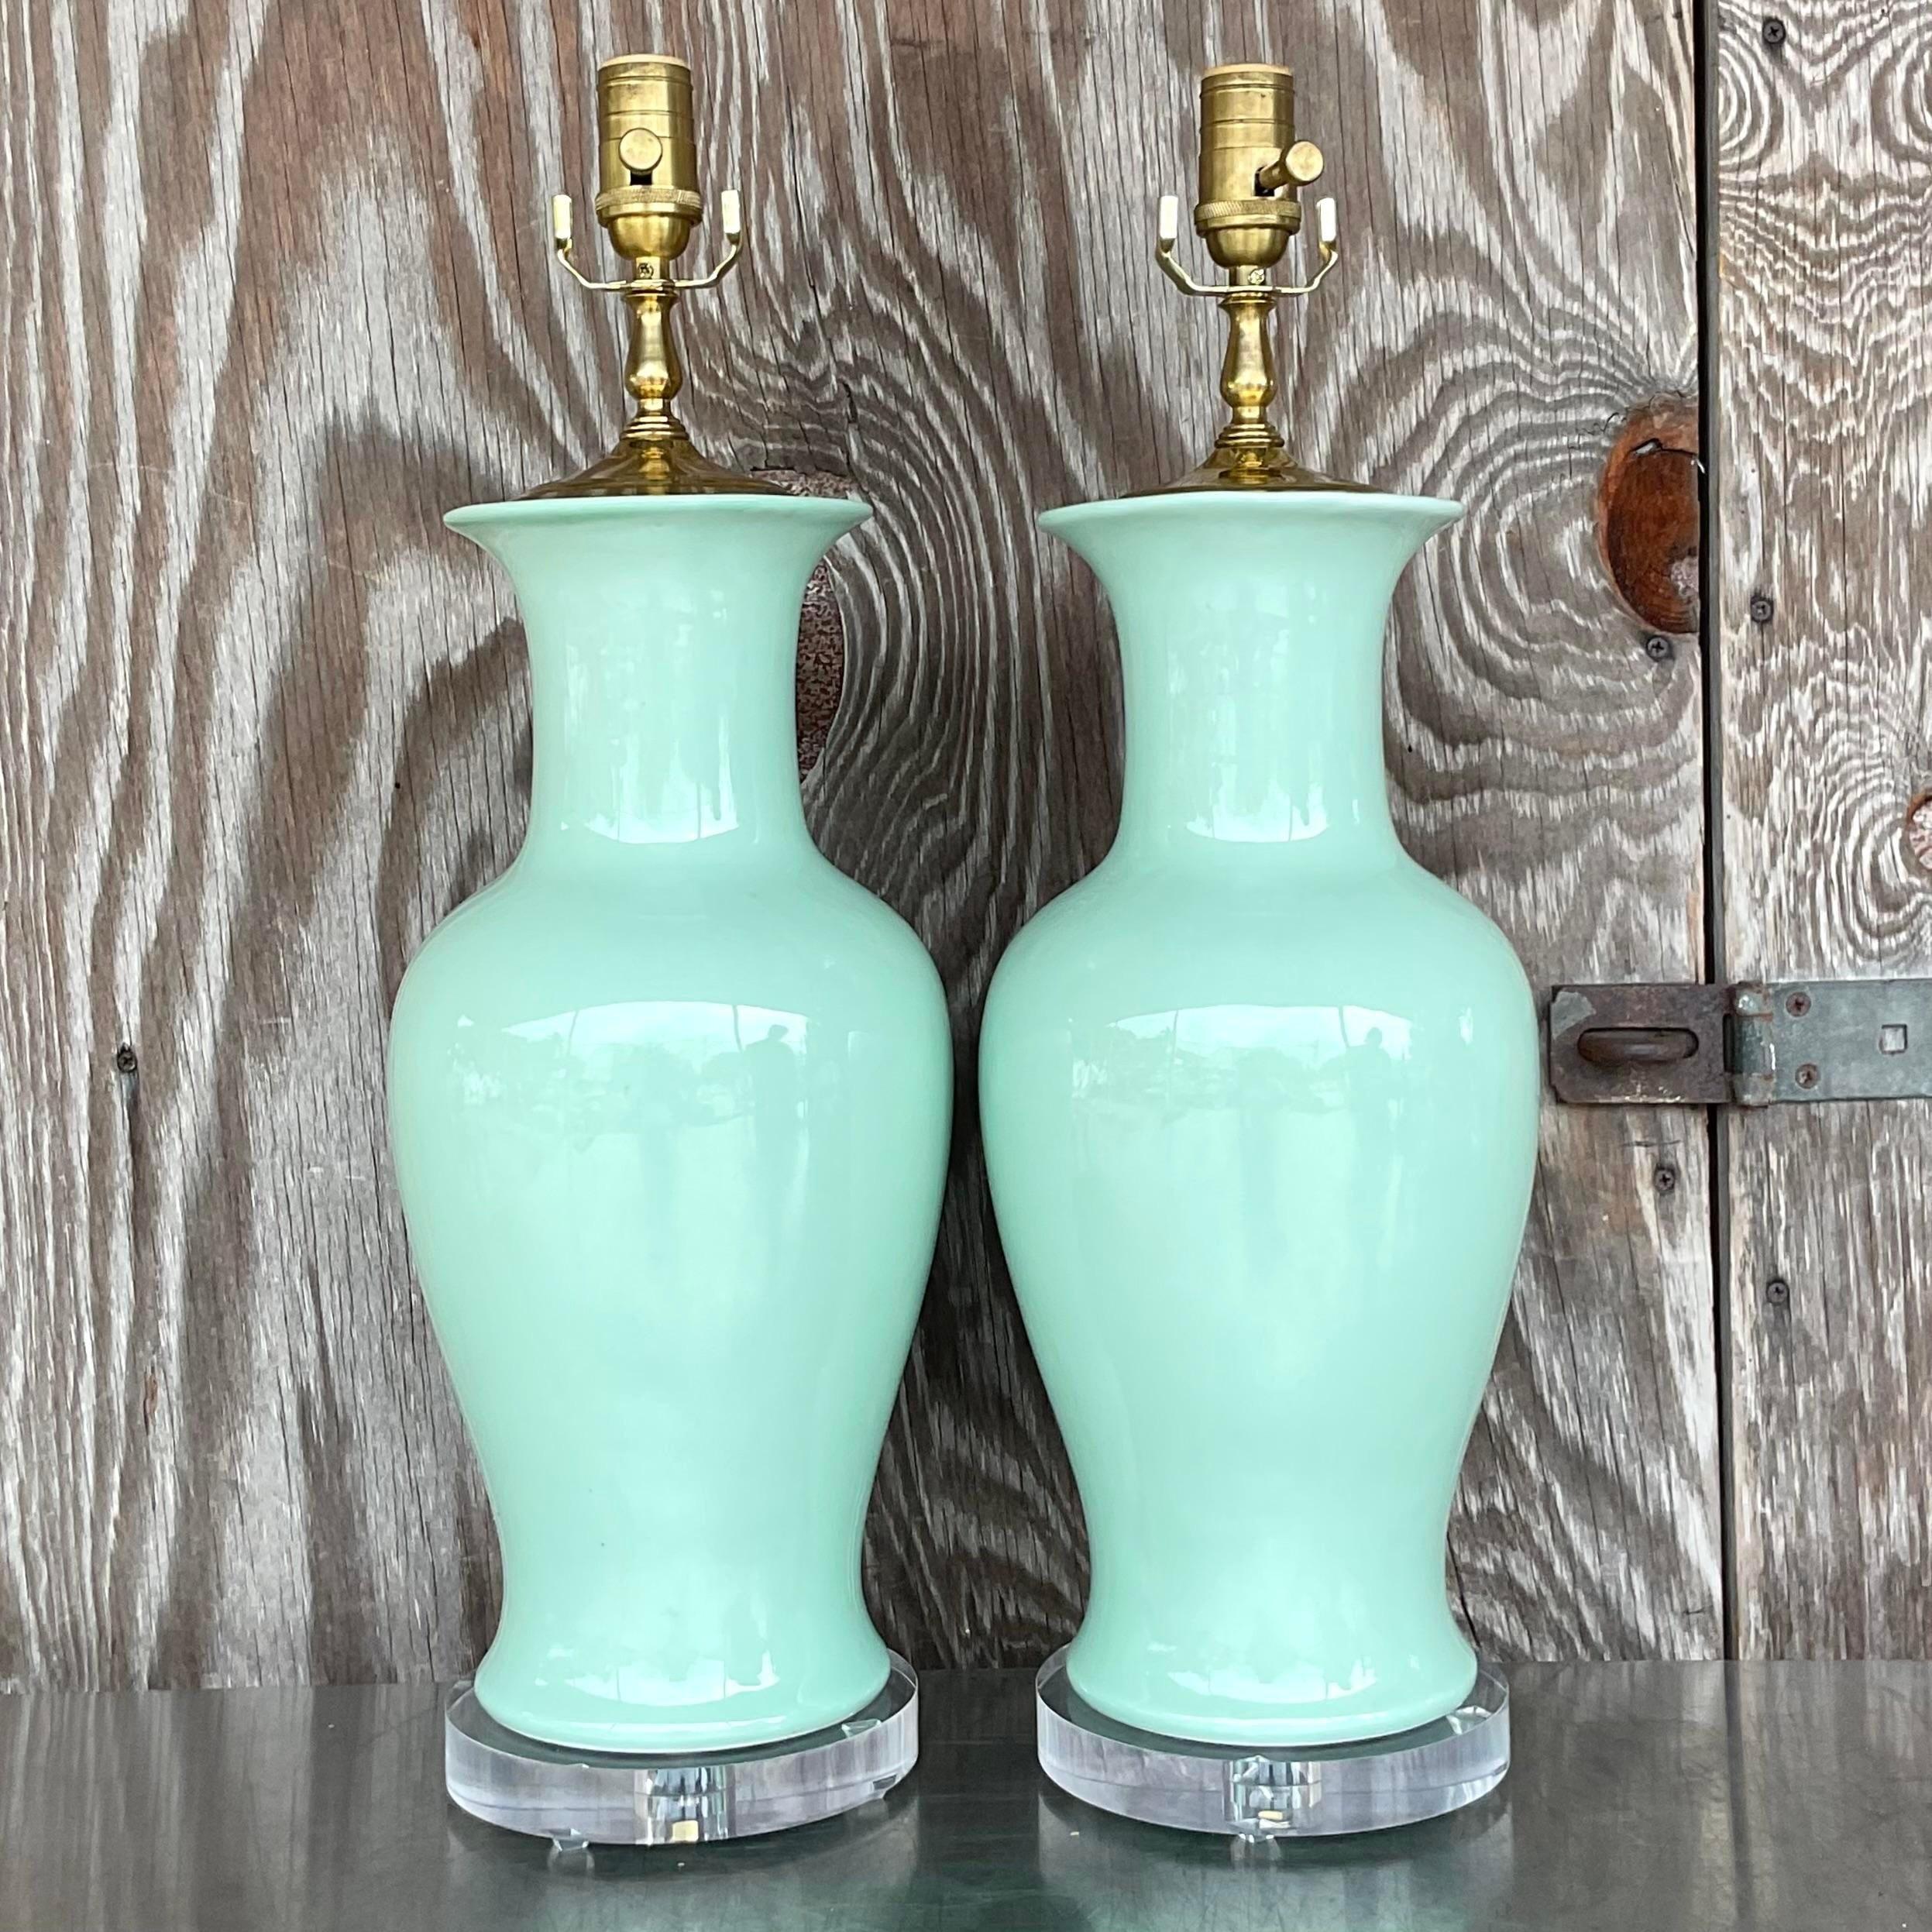 20th Century Vintage Regency Glazed Ceramic Table Lamps - a Pair For Sale